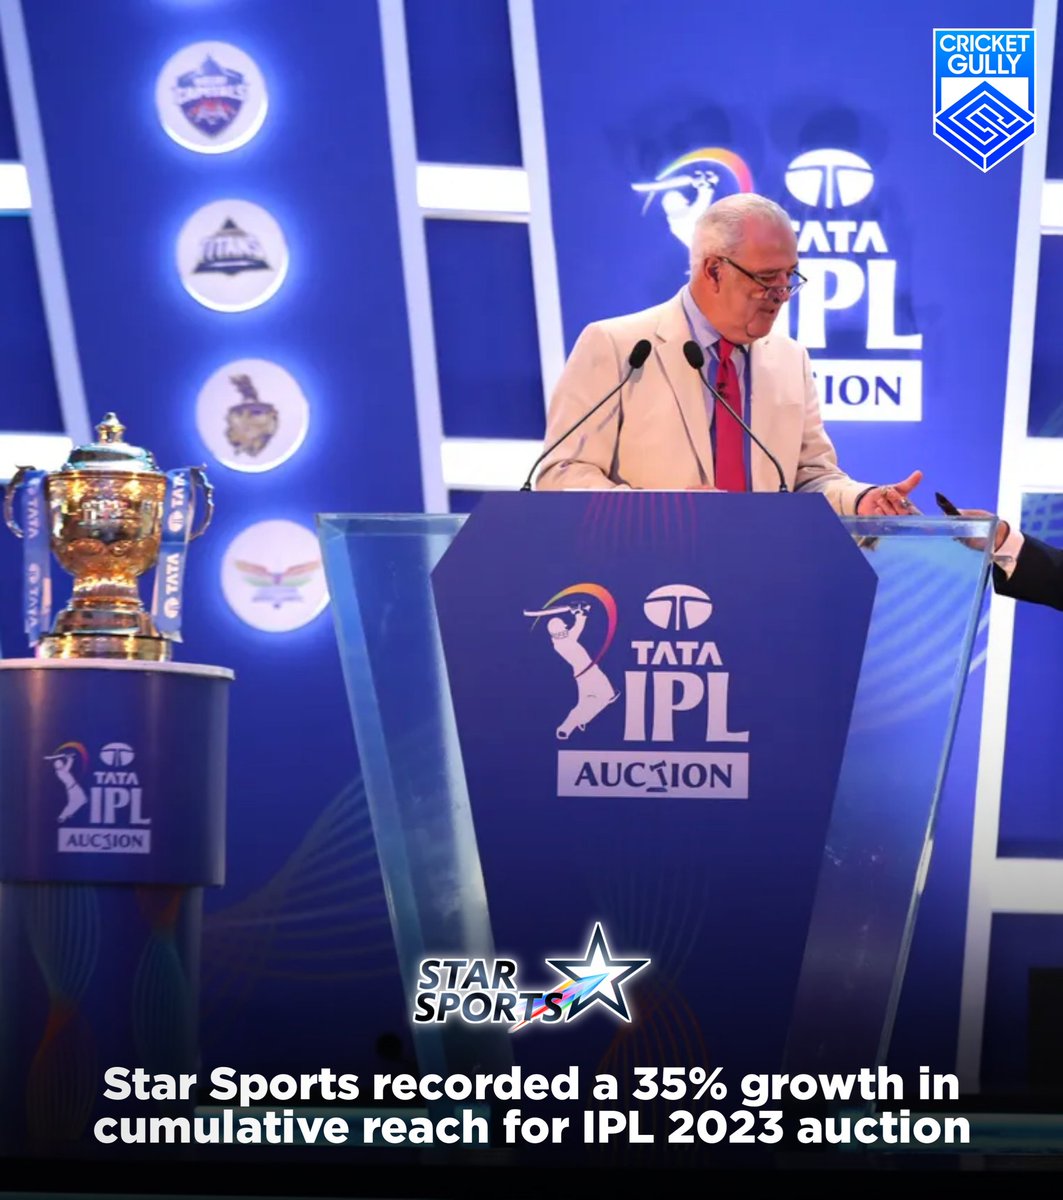 Star Sports recorded a 35% growth in cumulative reach for IPL 2023 auction 😮🔥
#IPL2023Auction